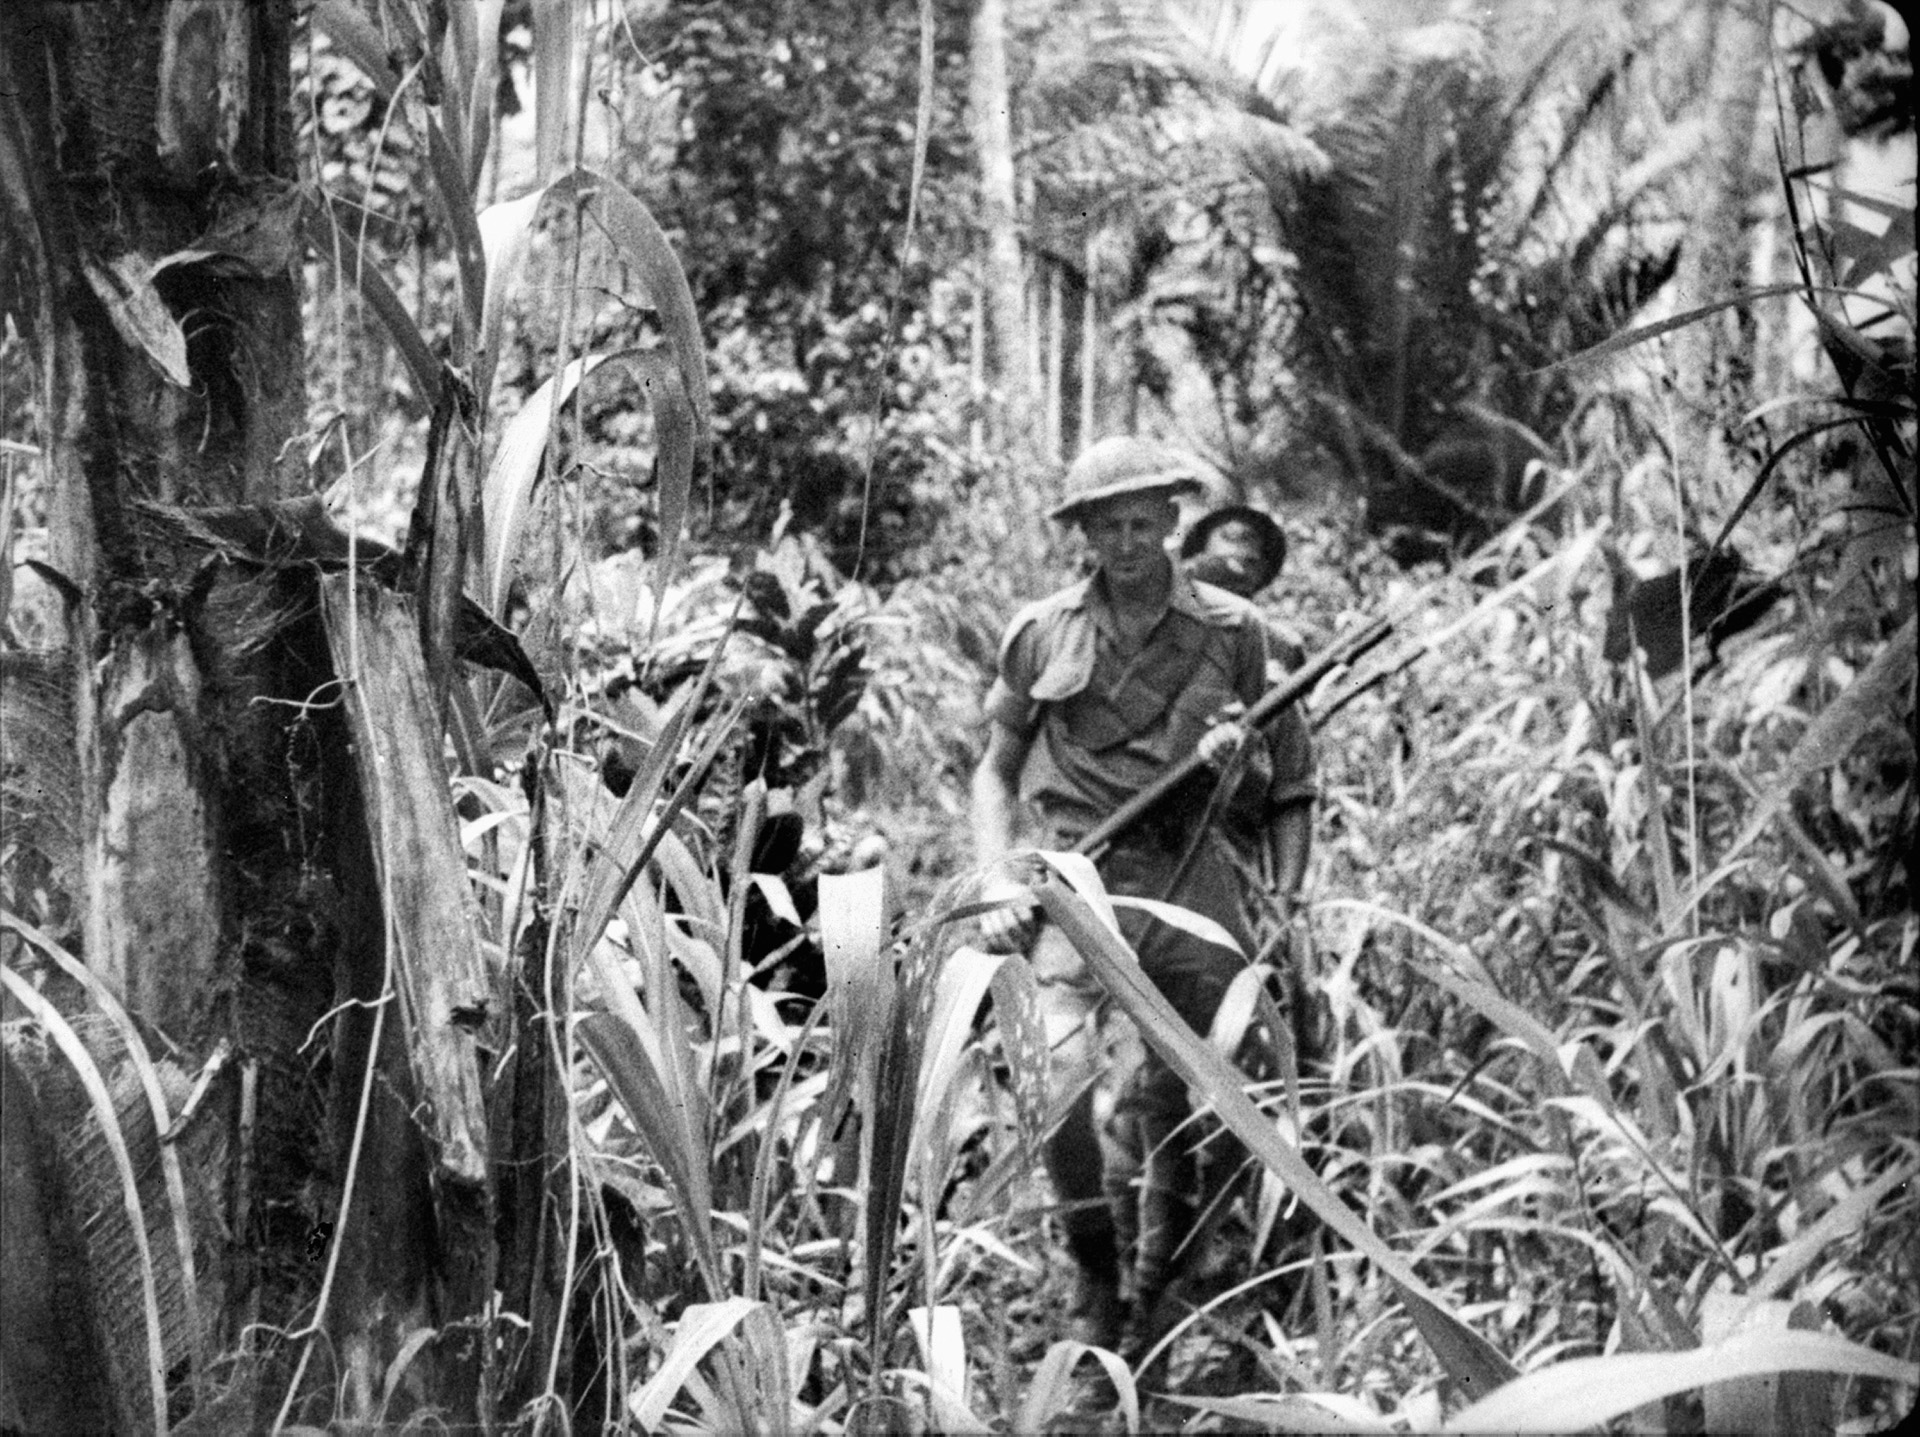 With dense jungle foliage, stifling heat, and the constant threat of the enemy, conditions in New Guinea were brutal for even the most hardened of soldiers.